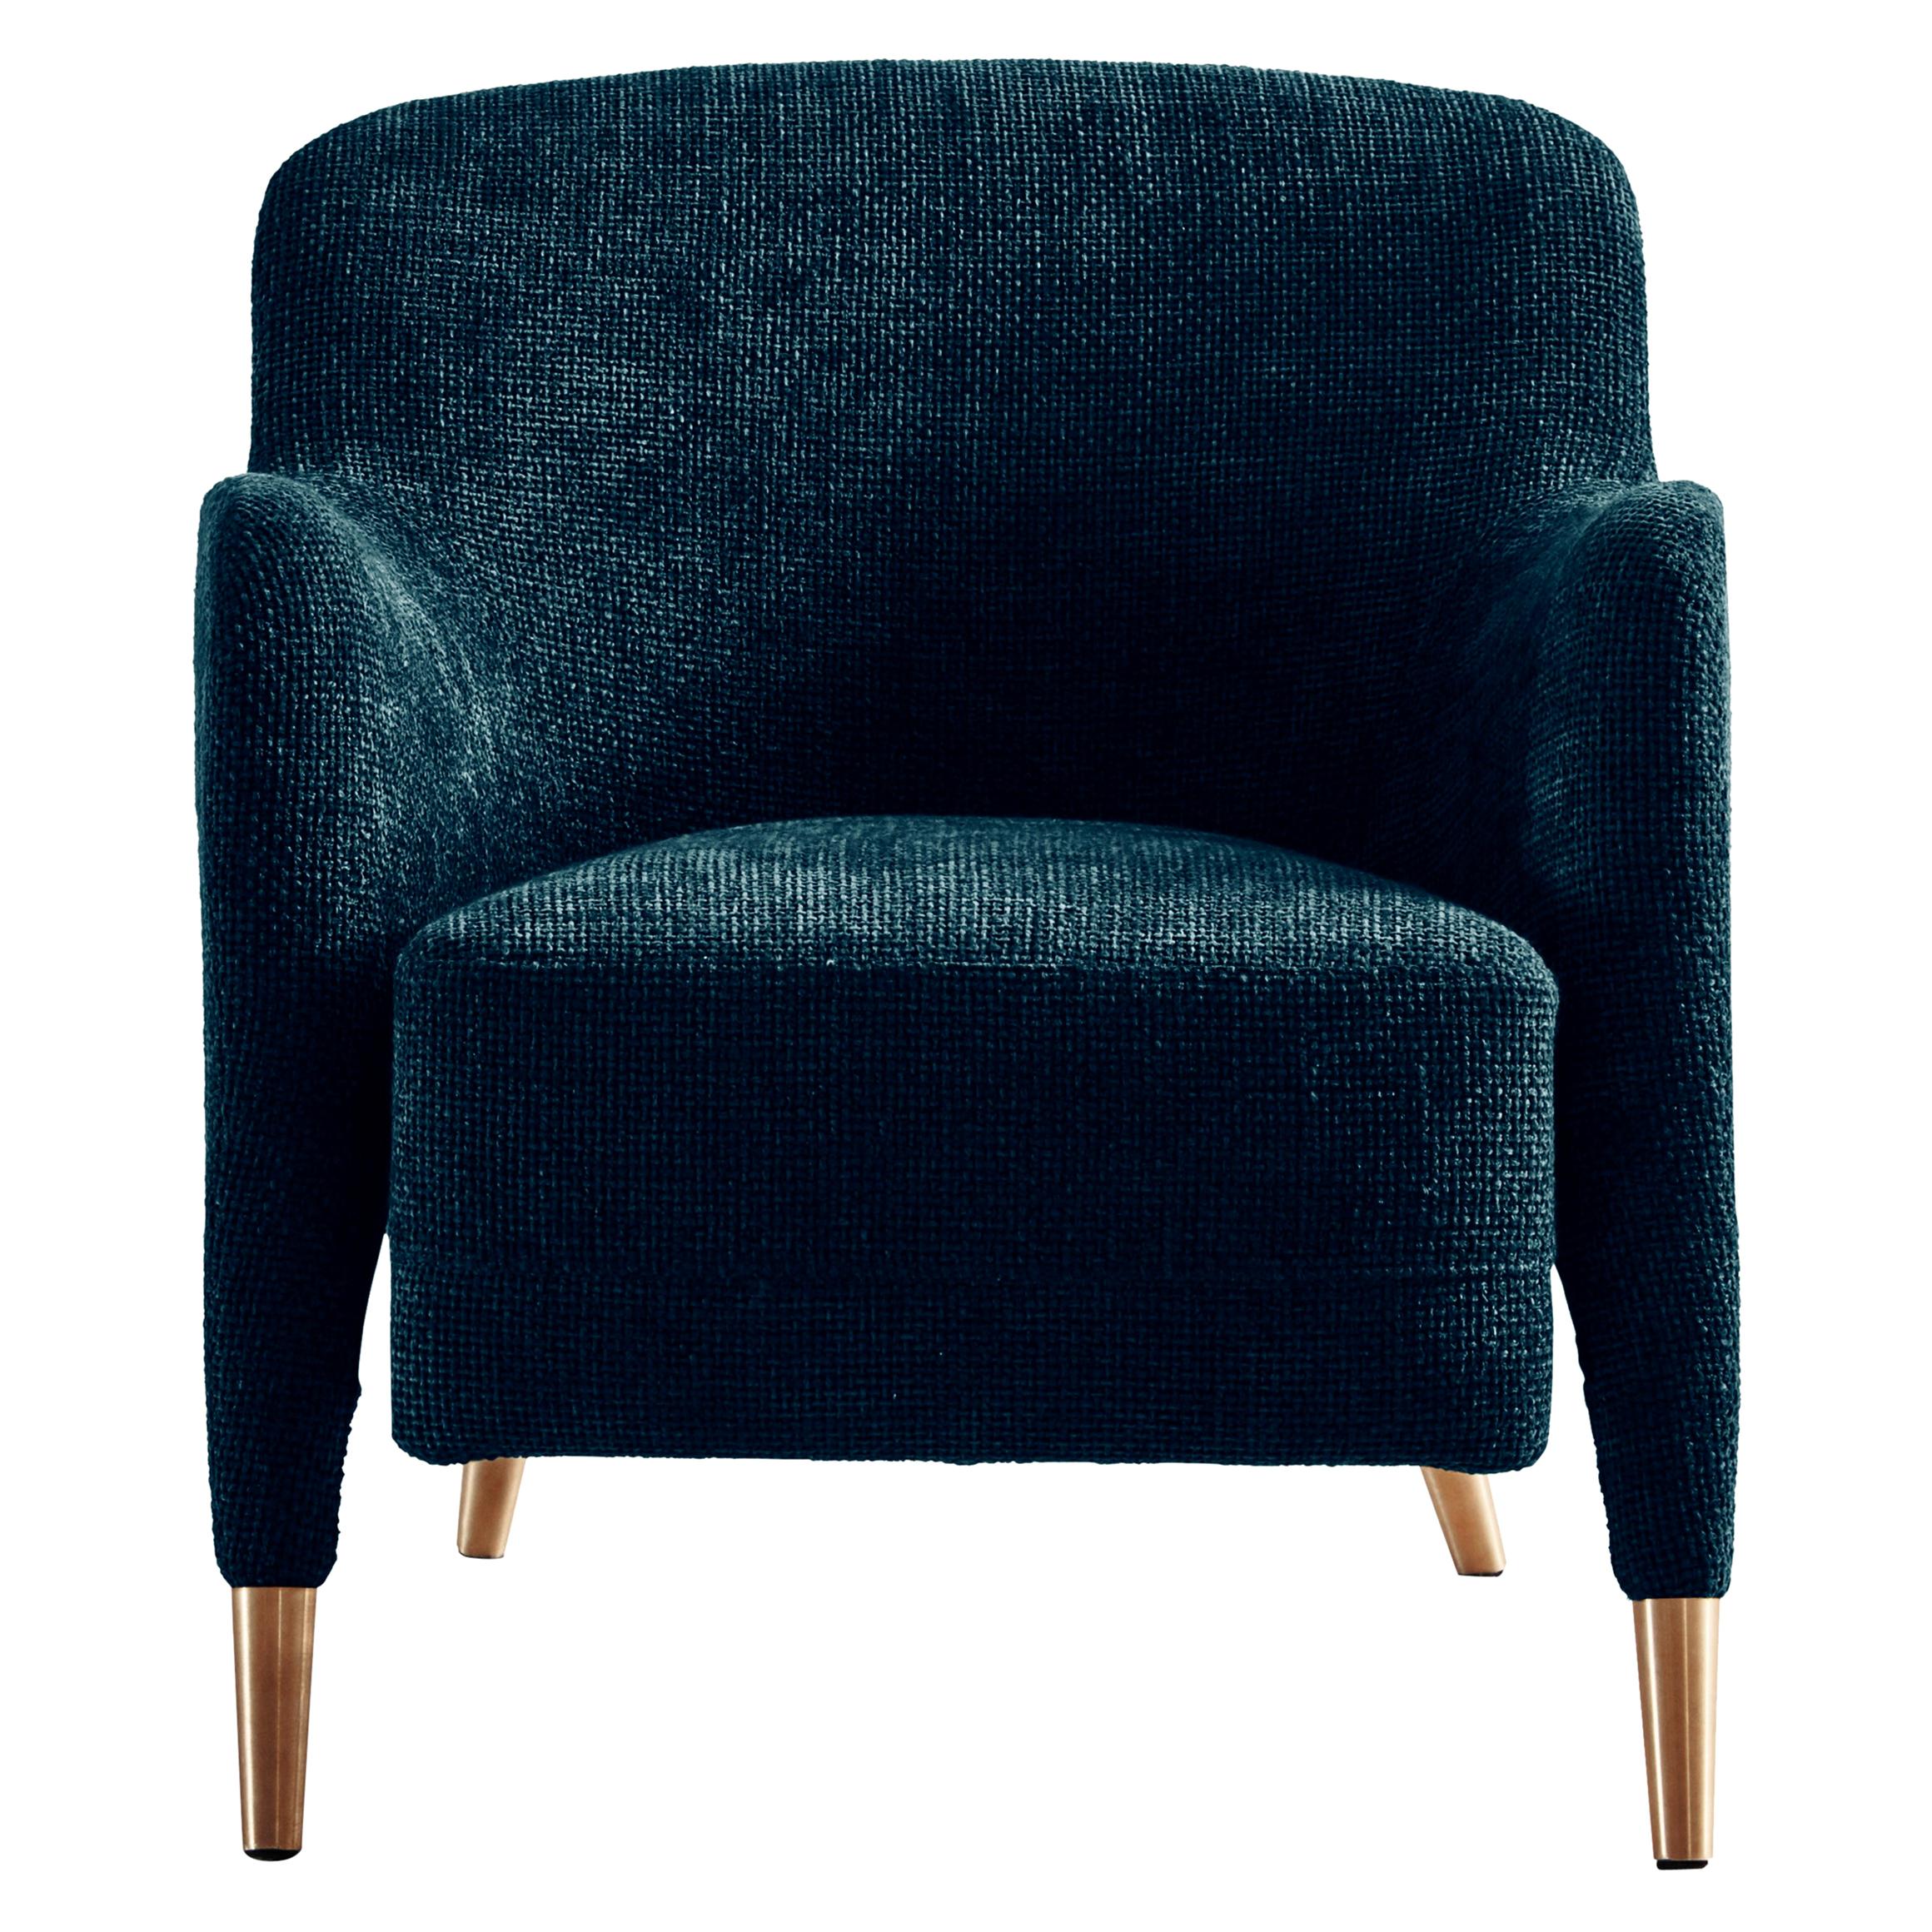 Armchair in Velvet Molteni&C by Gio Ponti Design D.151.4 - made in Italy